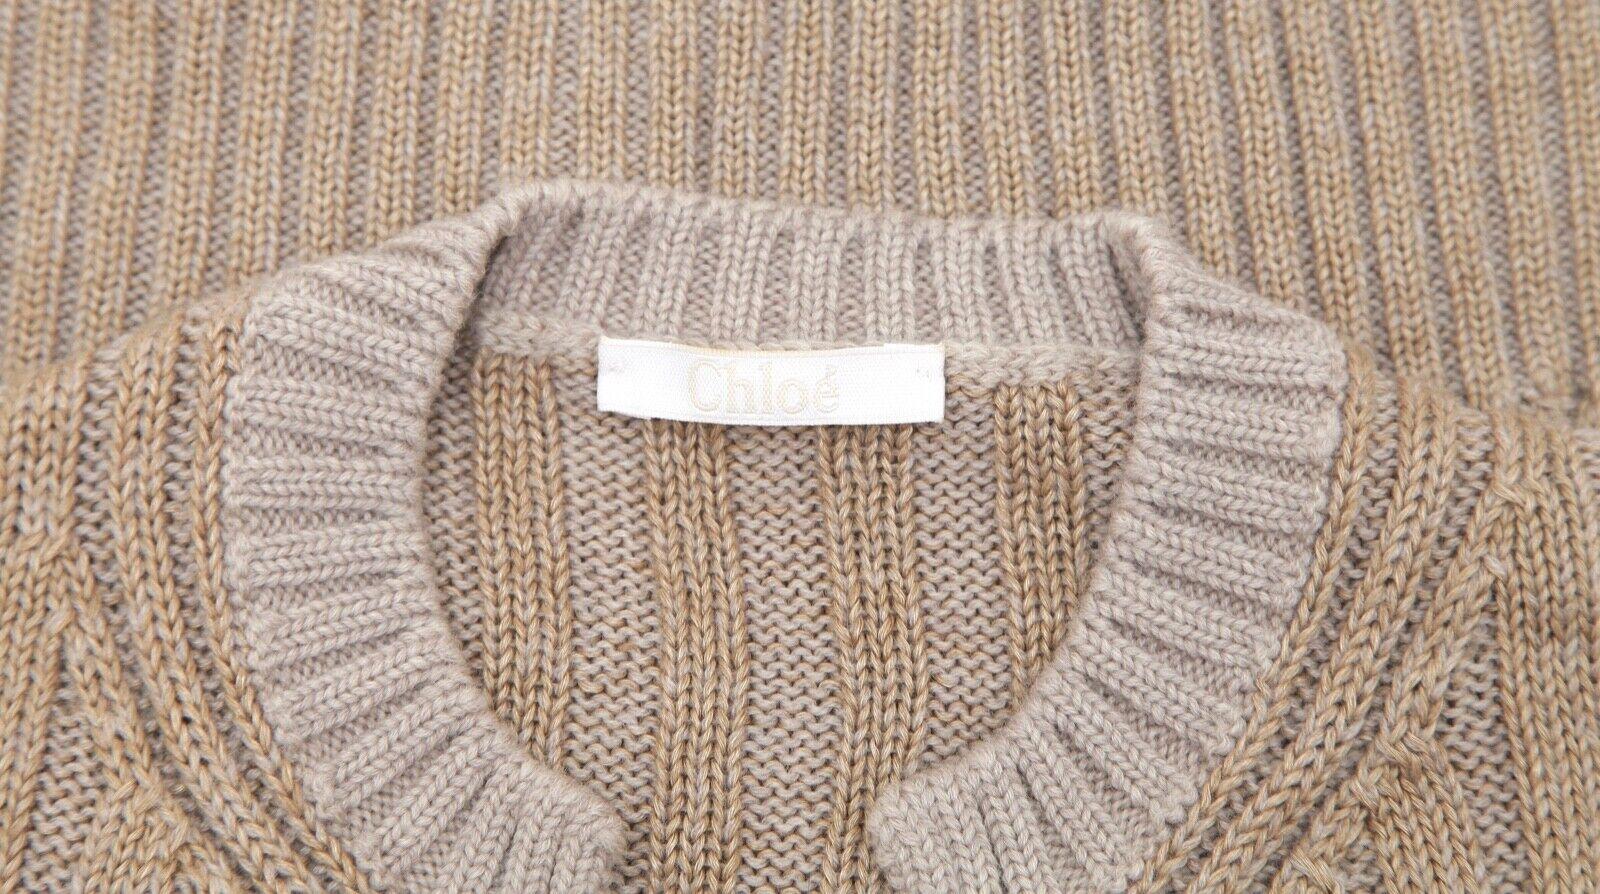 CHLOE Top Sweater Knit 3/4 Sleeve Beige Leather Ribbed Sz XS 2011 4